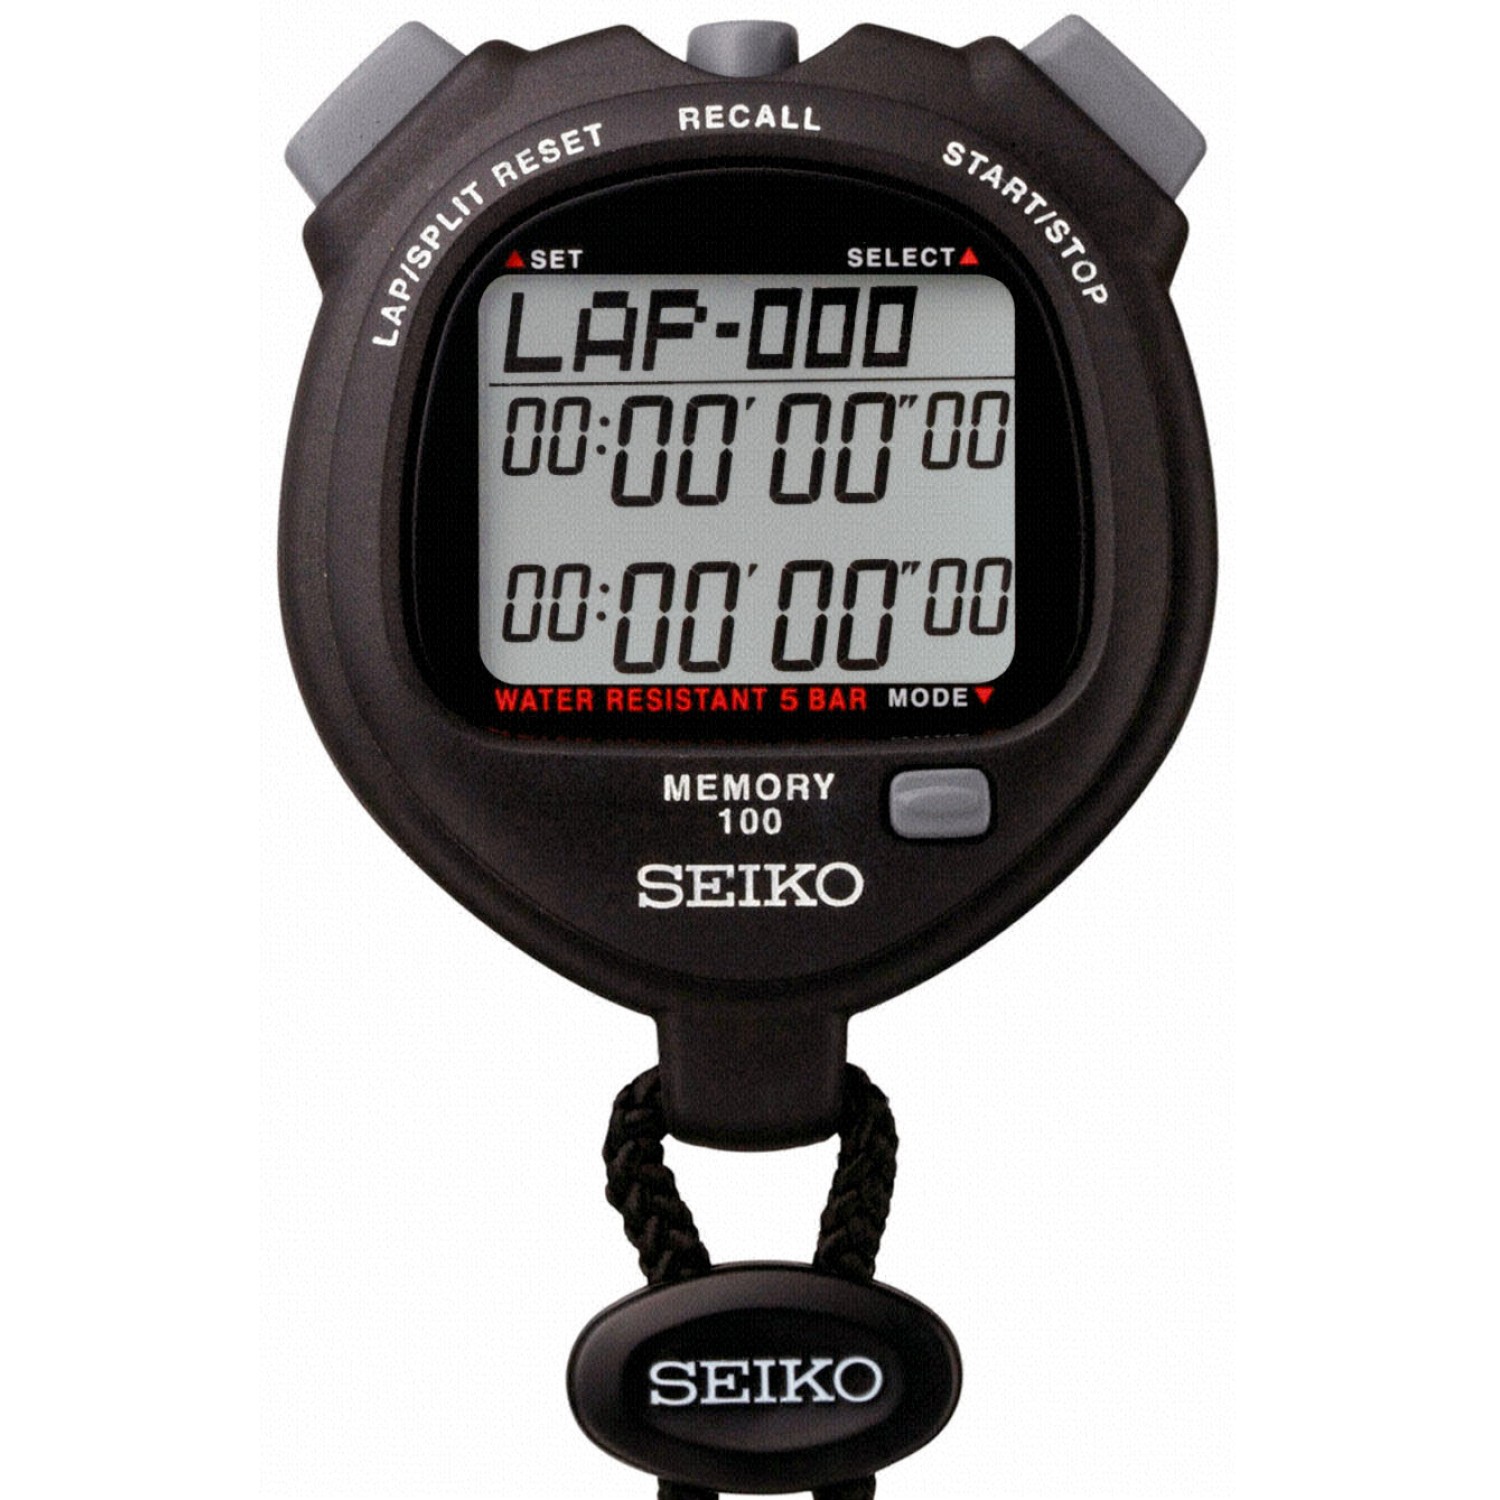 S23601P Seiko Multi Function Stopwatch. Oxipay is simply the easier way to pay - use Oxipay and well spread your payment up to a maximum of $1500 over 4 easy instalments. No interest. Ever! 3 Months No Payments and Interest for Q Card holders 100 split / 